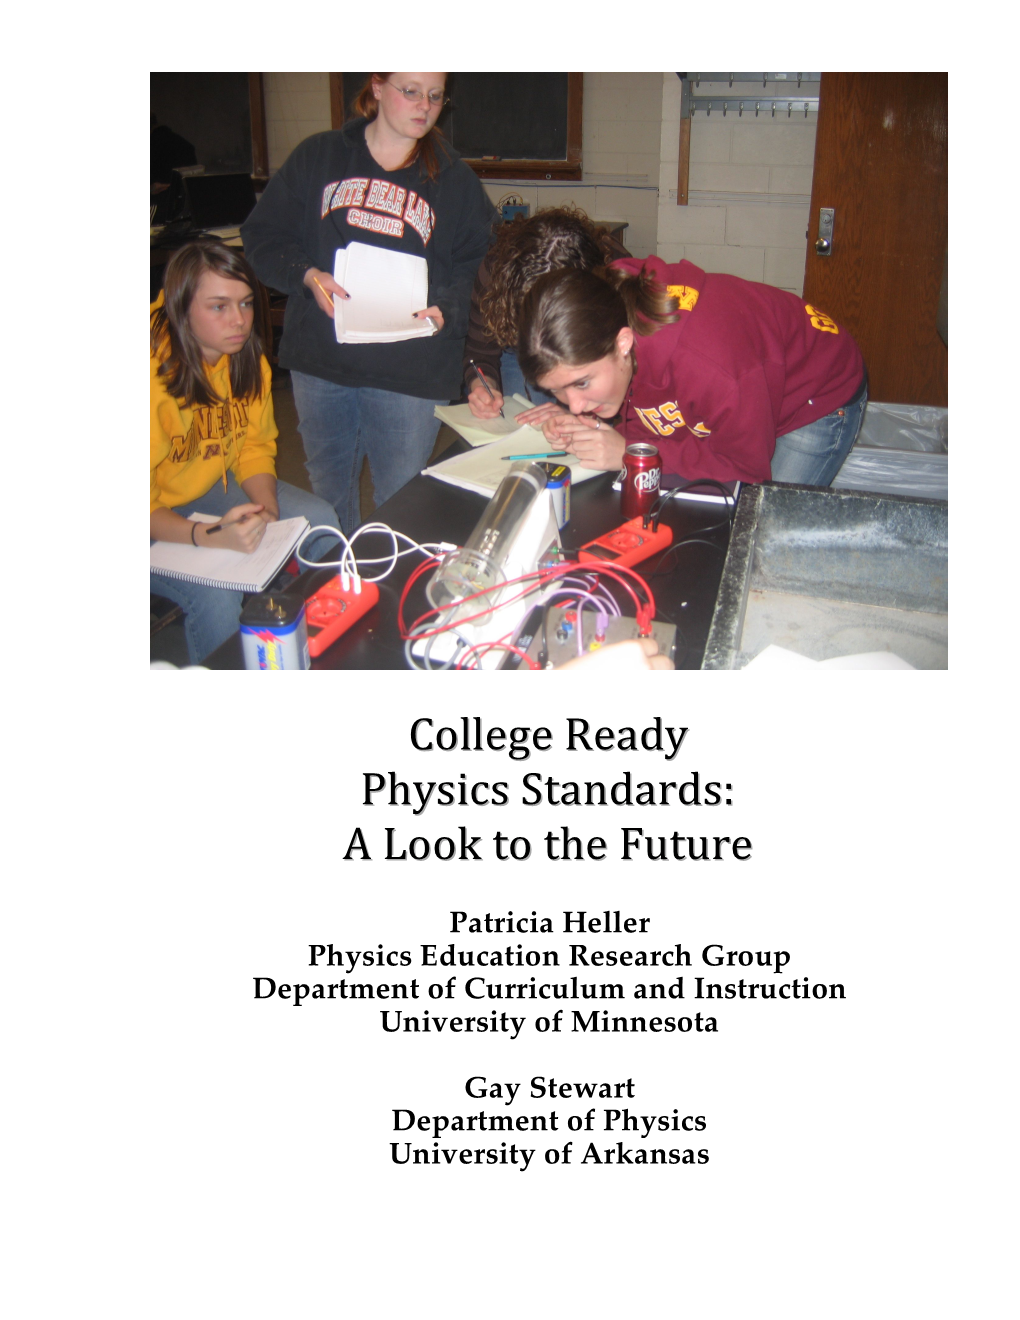 College Ready Physics Standards